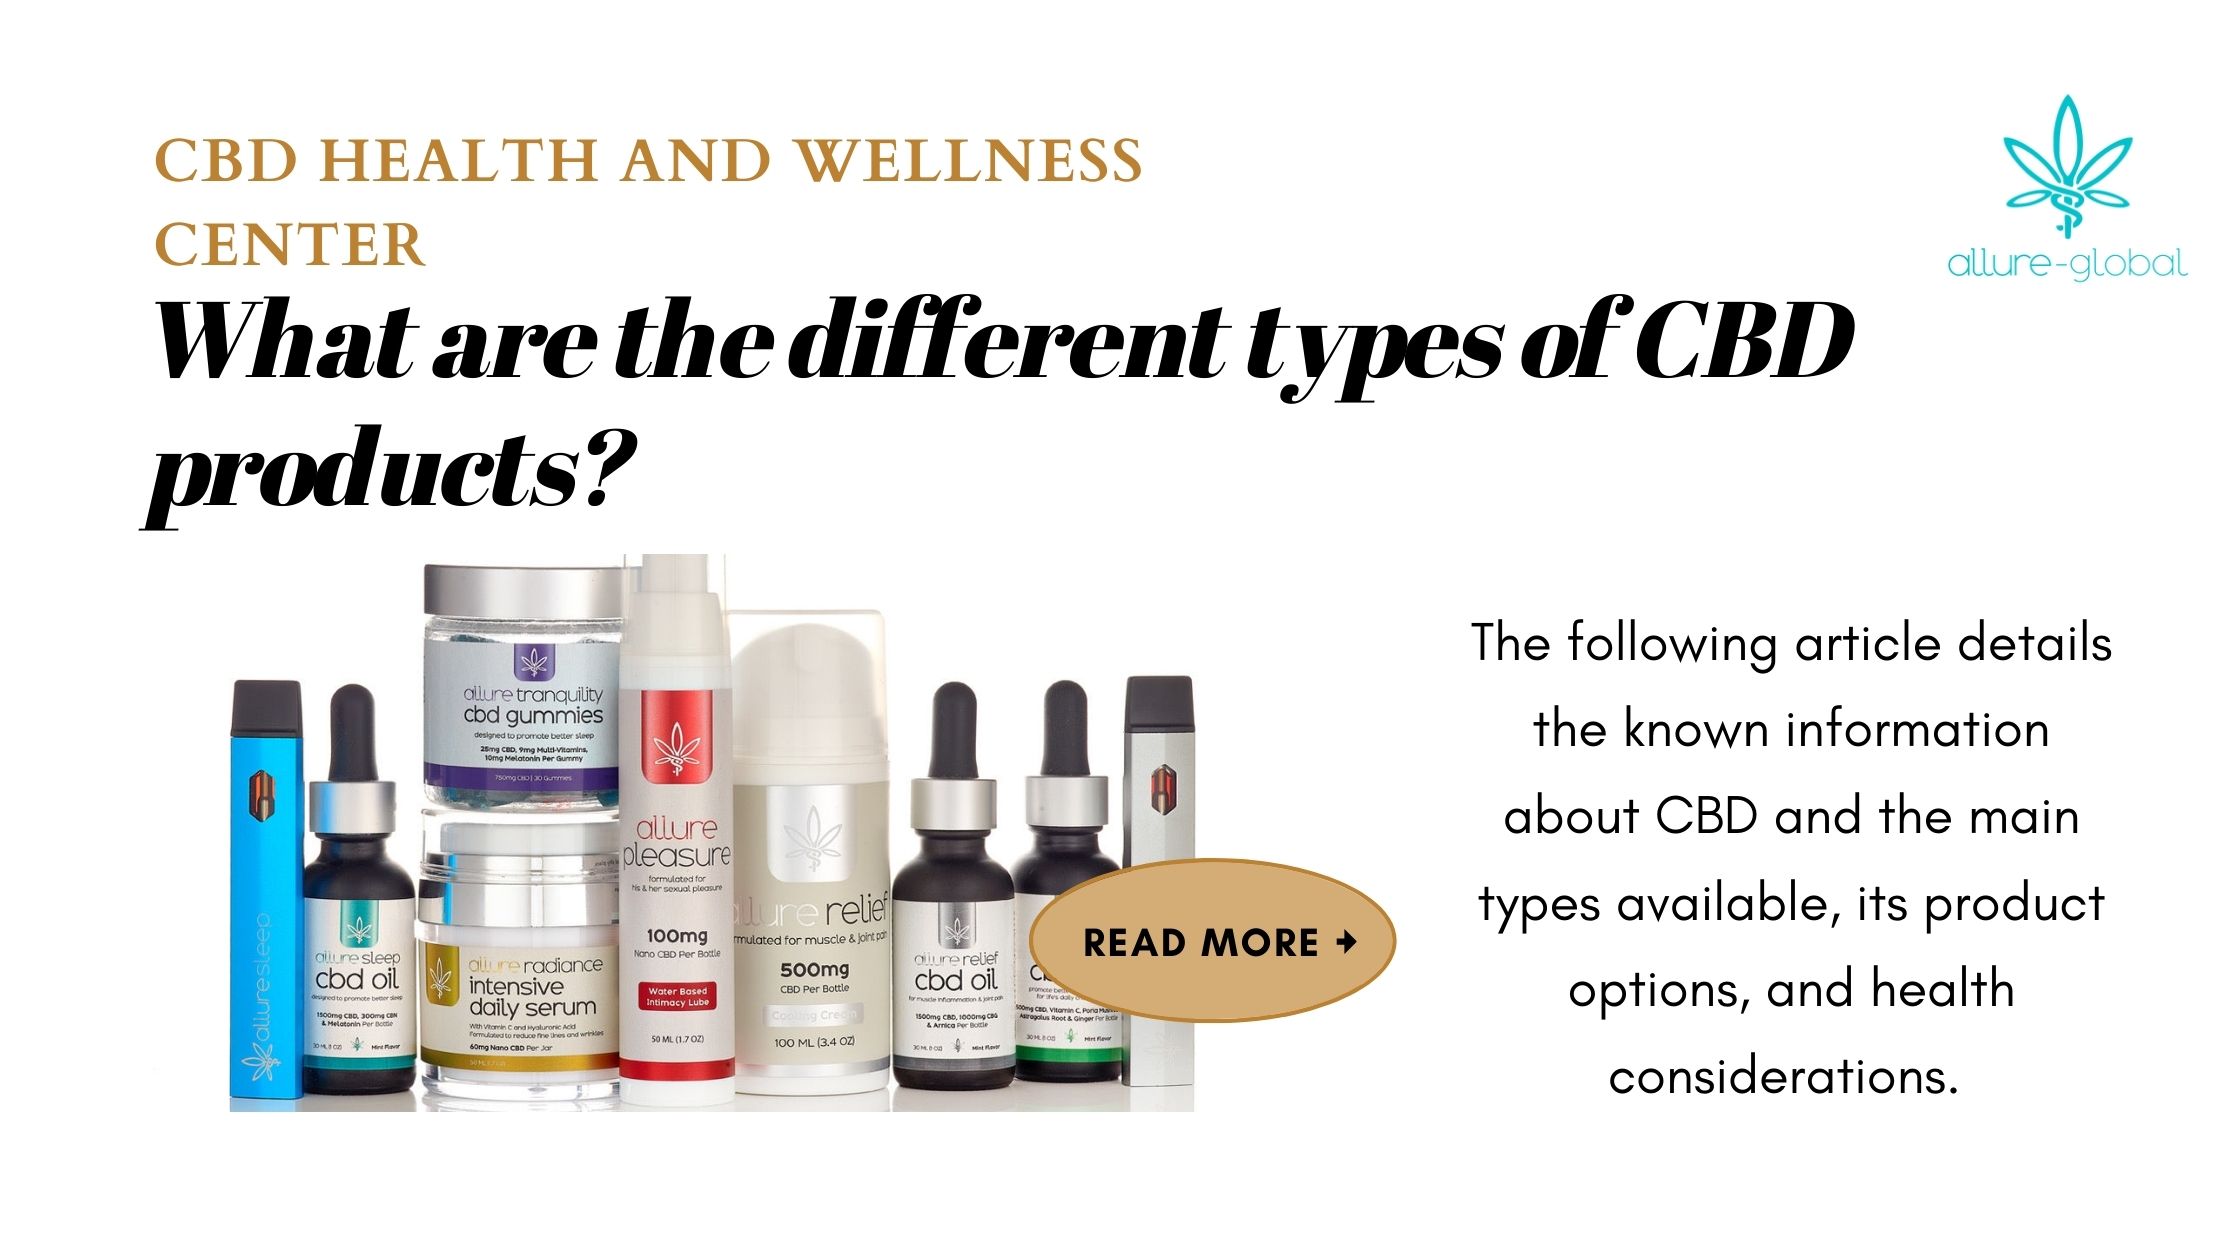 What are the different types of CBD products